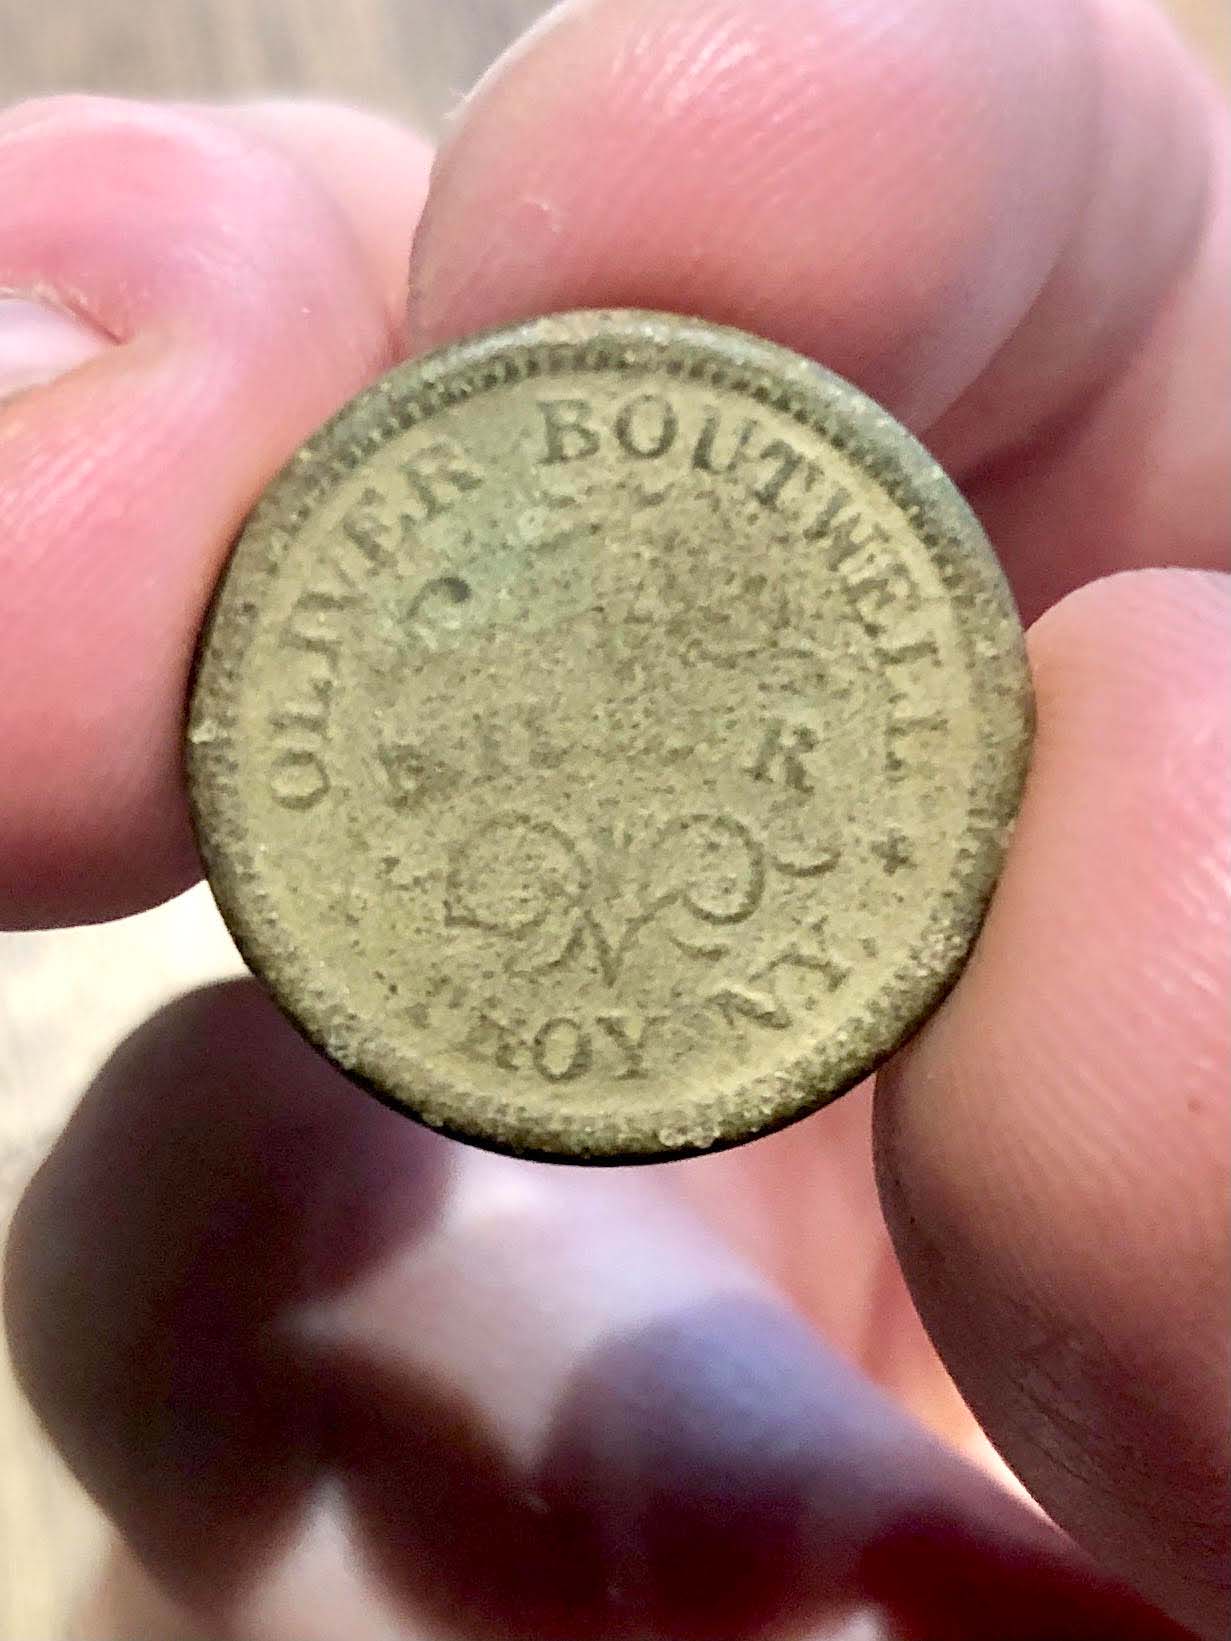 Brandon shopkeepers dealt with coin shortages during the Civil War, too